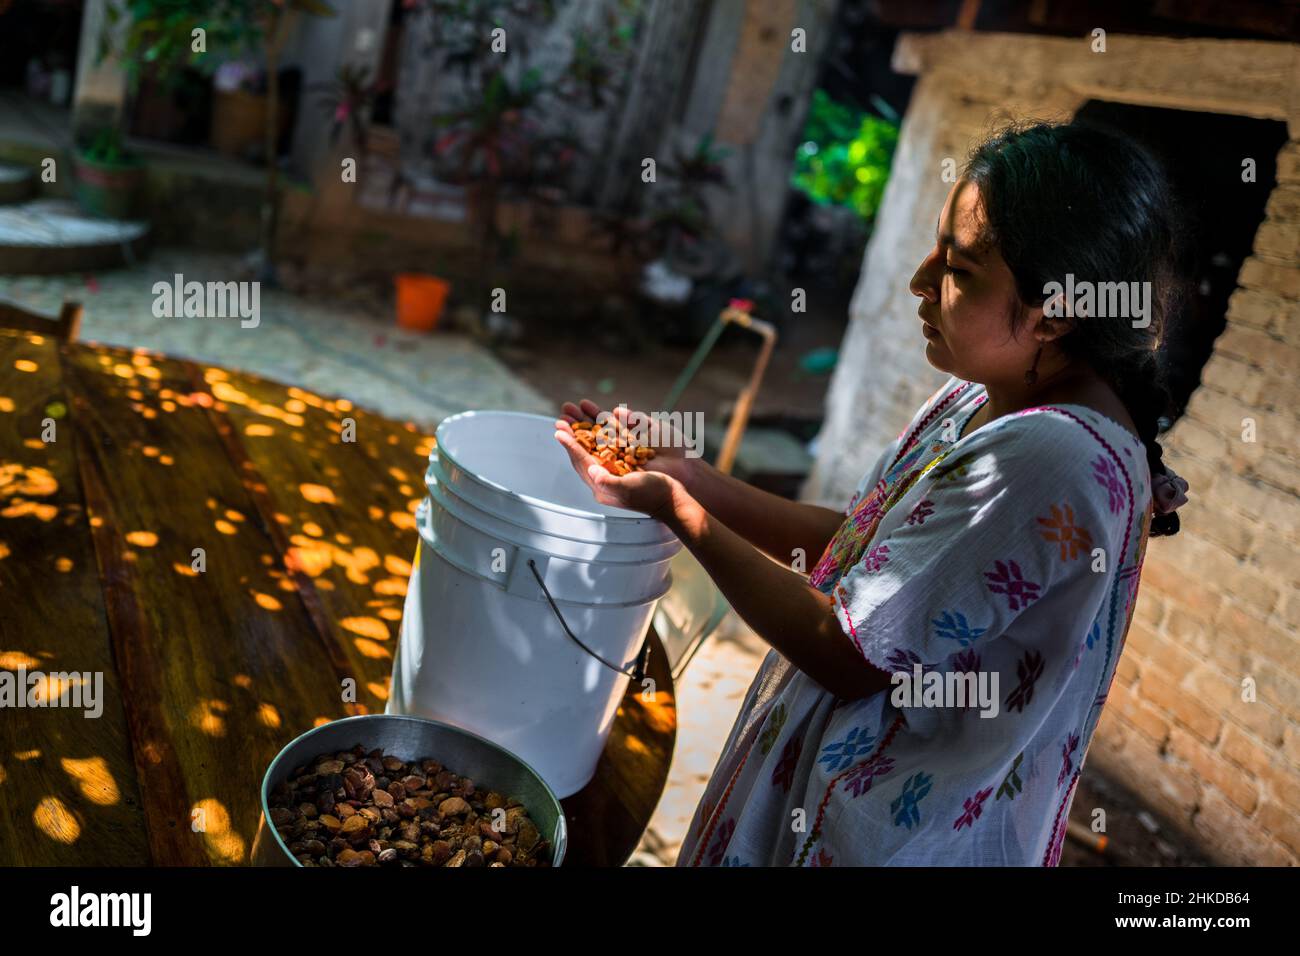 An Amuzgo indigenous woman inspects dried and washed cacao beans before roasting in artisanal chocolate manufacture in Xochistlahuaca, Mexico. Stock Photo